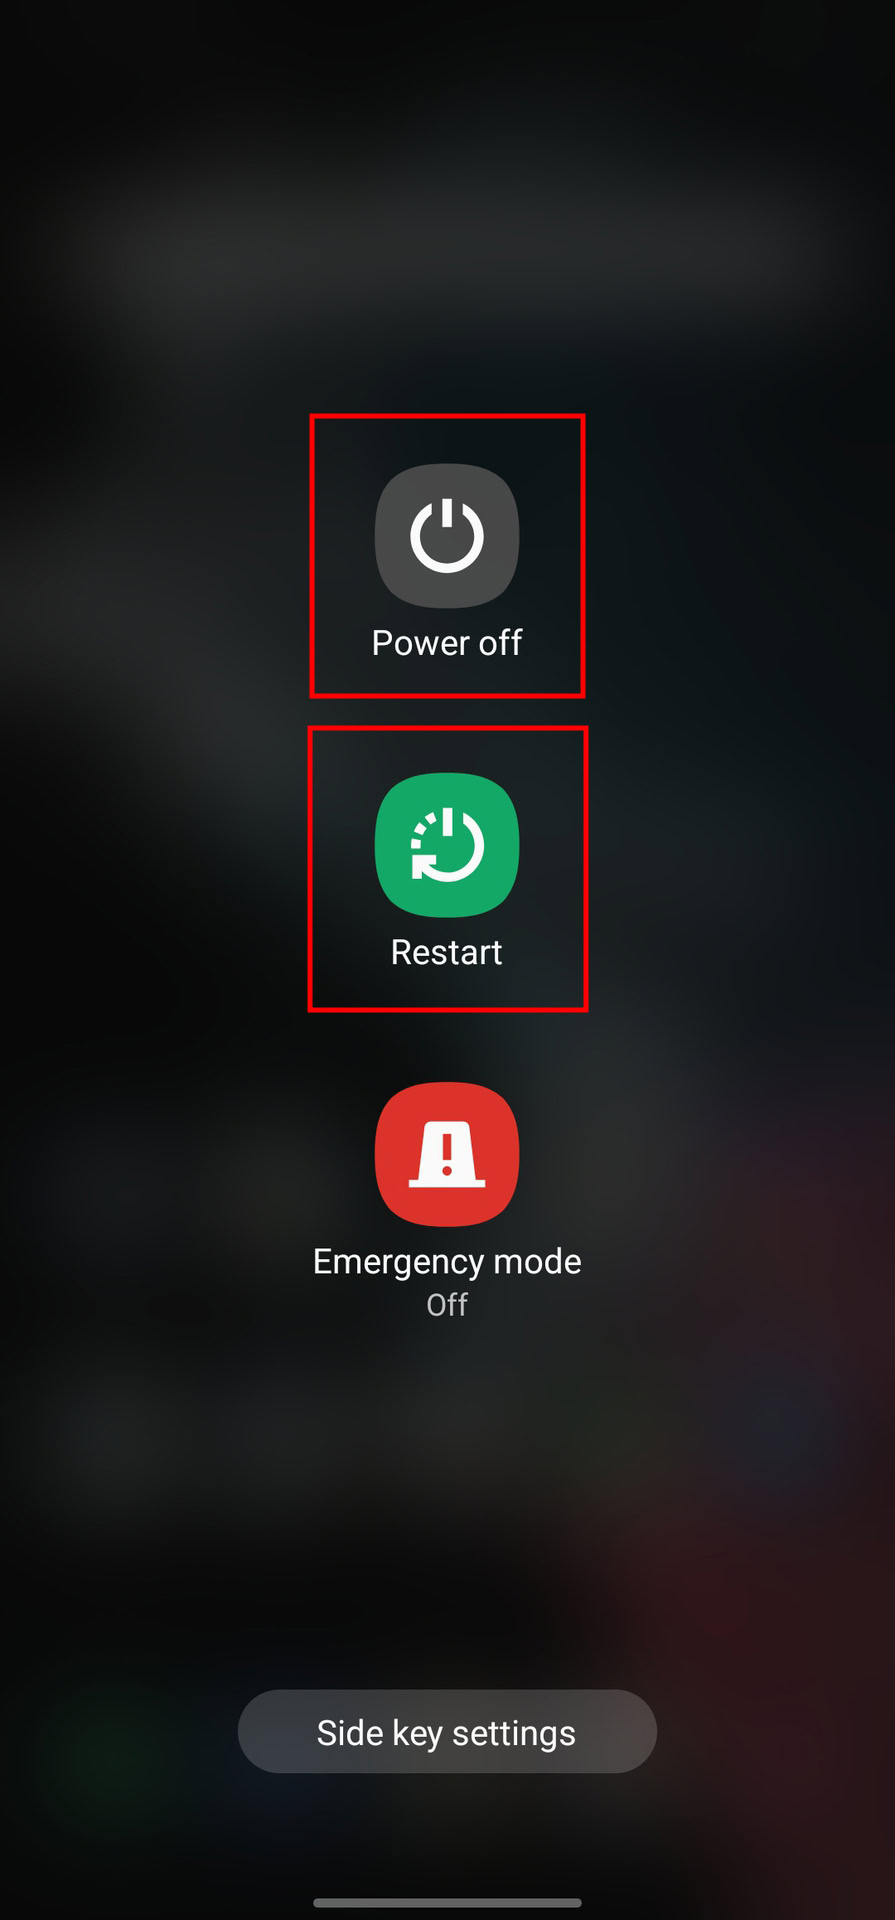 Samsung Galaxy S22 settings for turning off restarting and more